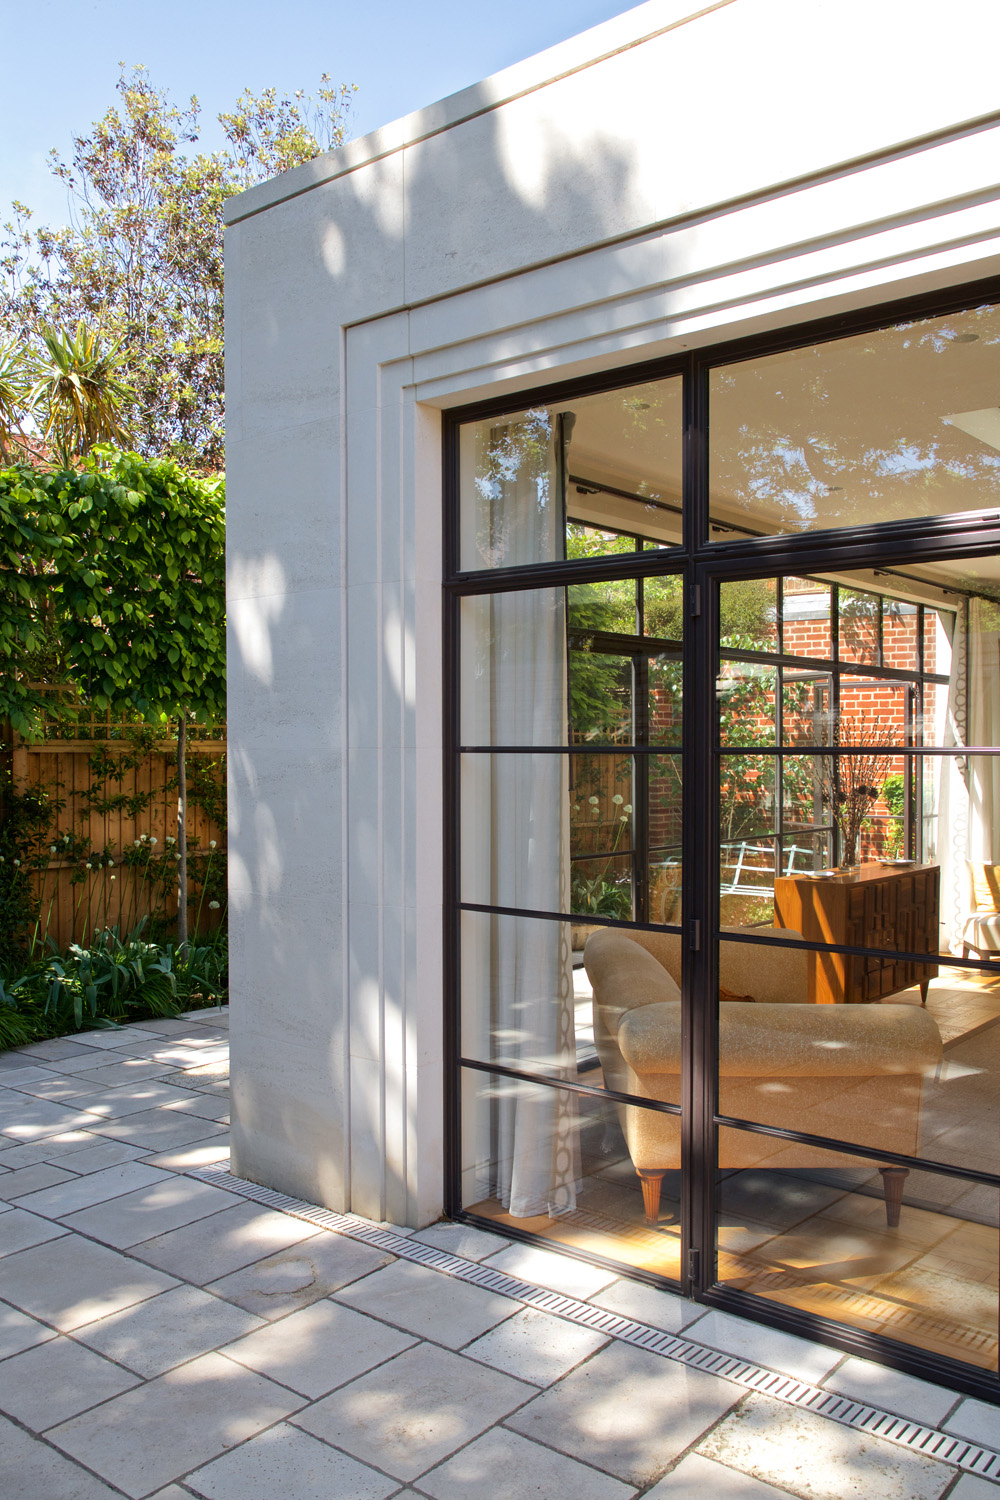 Crittall Doors by Nash Baker - contemporary architecture design studio in London